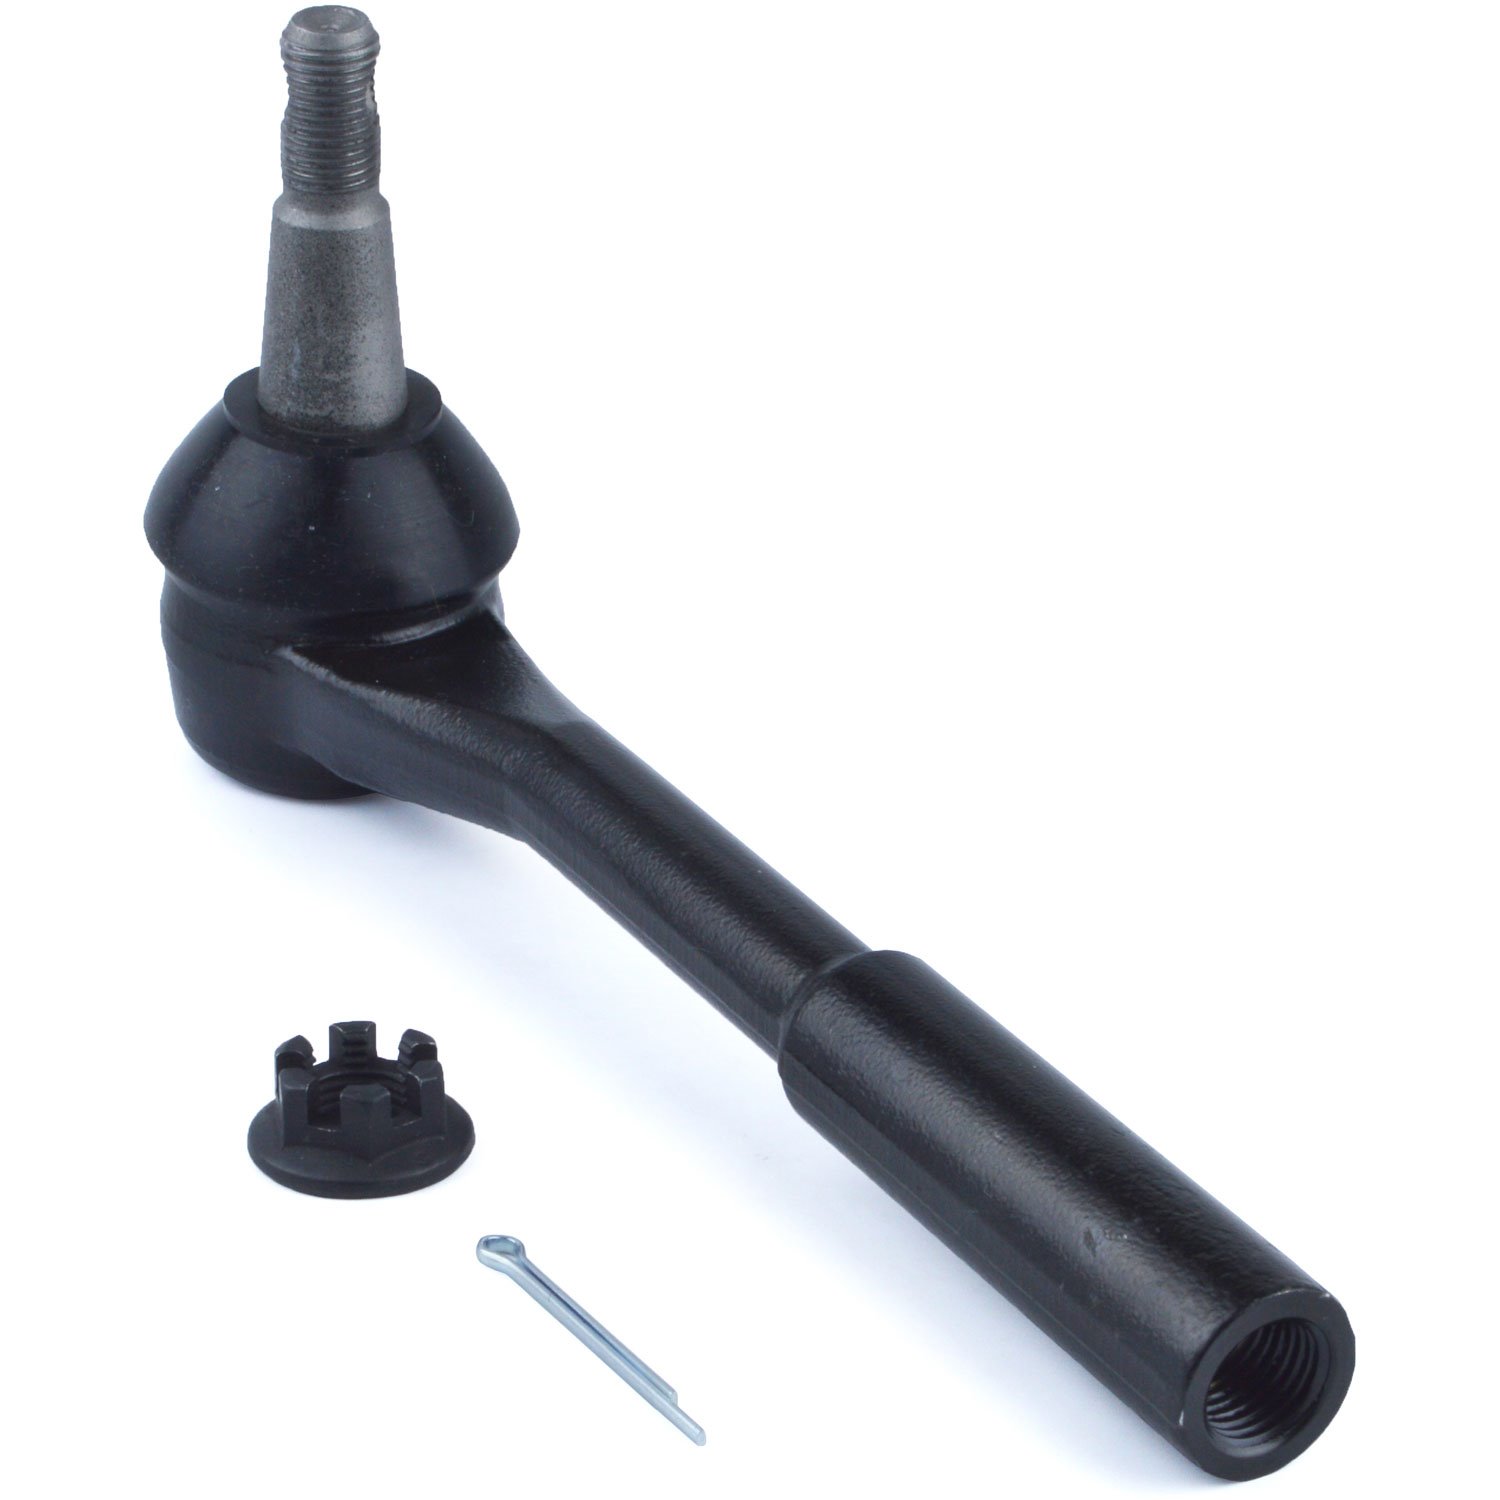 Greasable E-Coated Rear Outer Tie Rod End